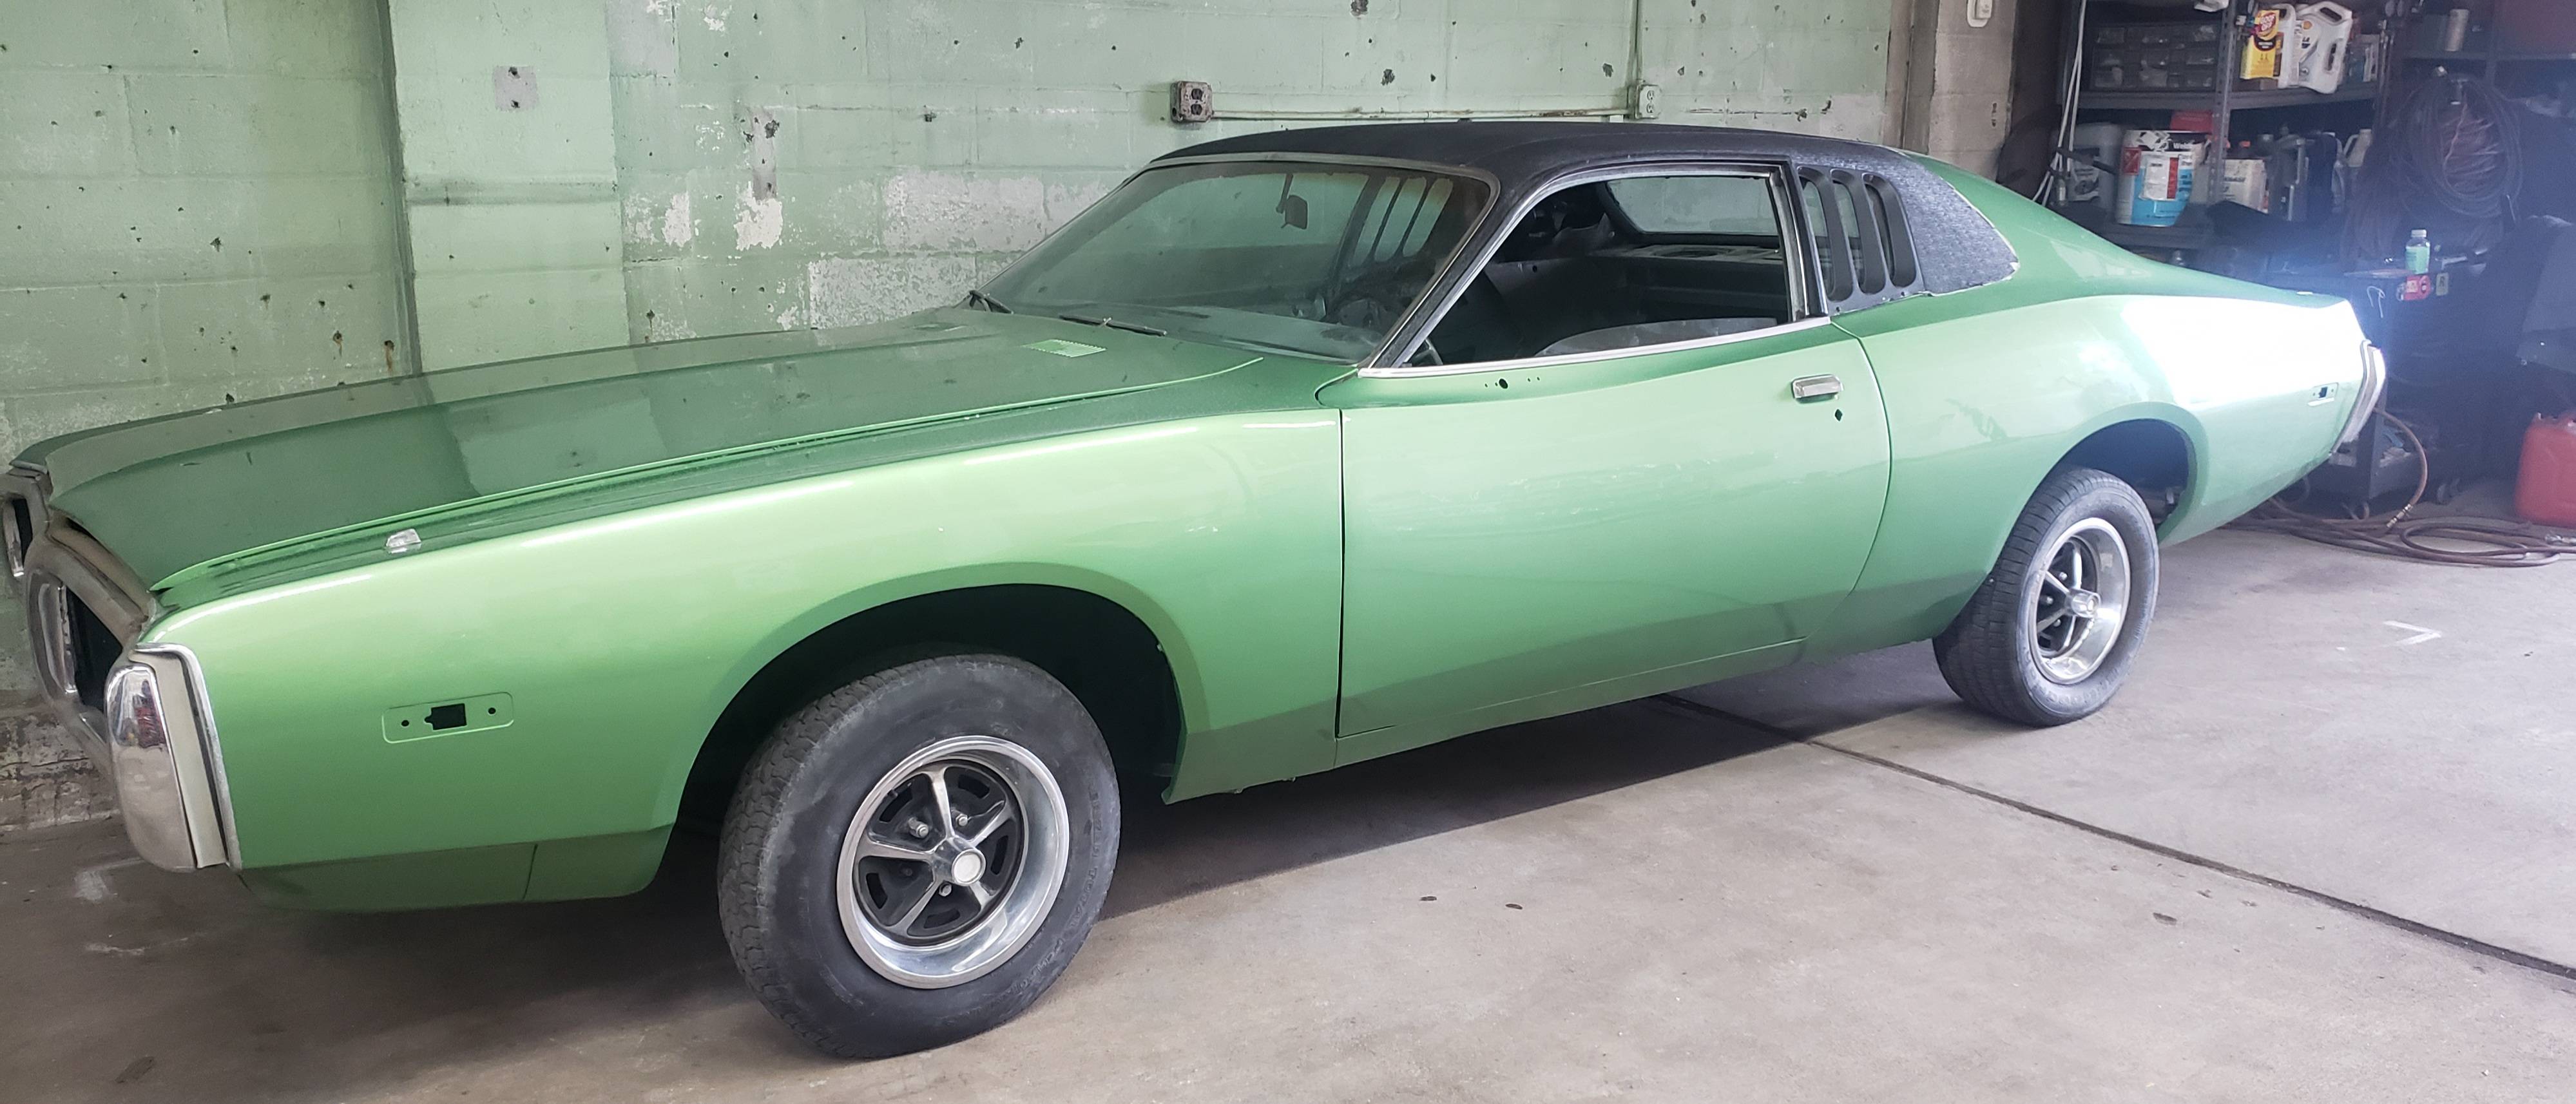 1973 Dodge Charger SE - Just Painted.jpg